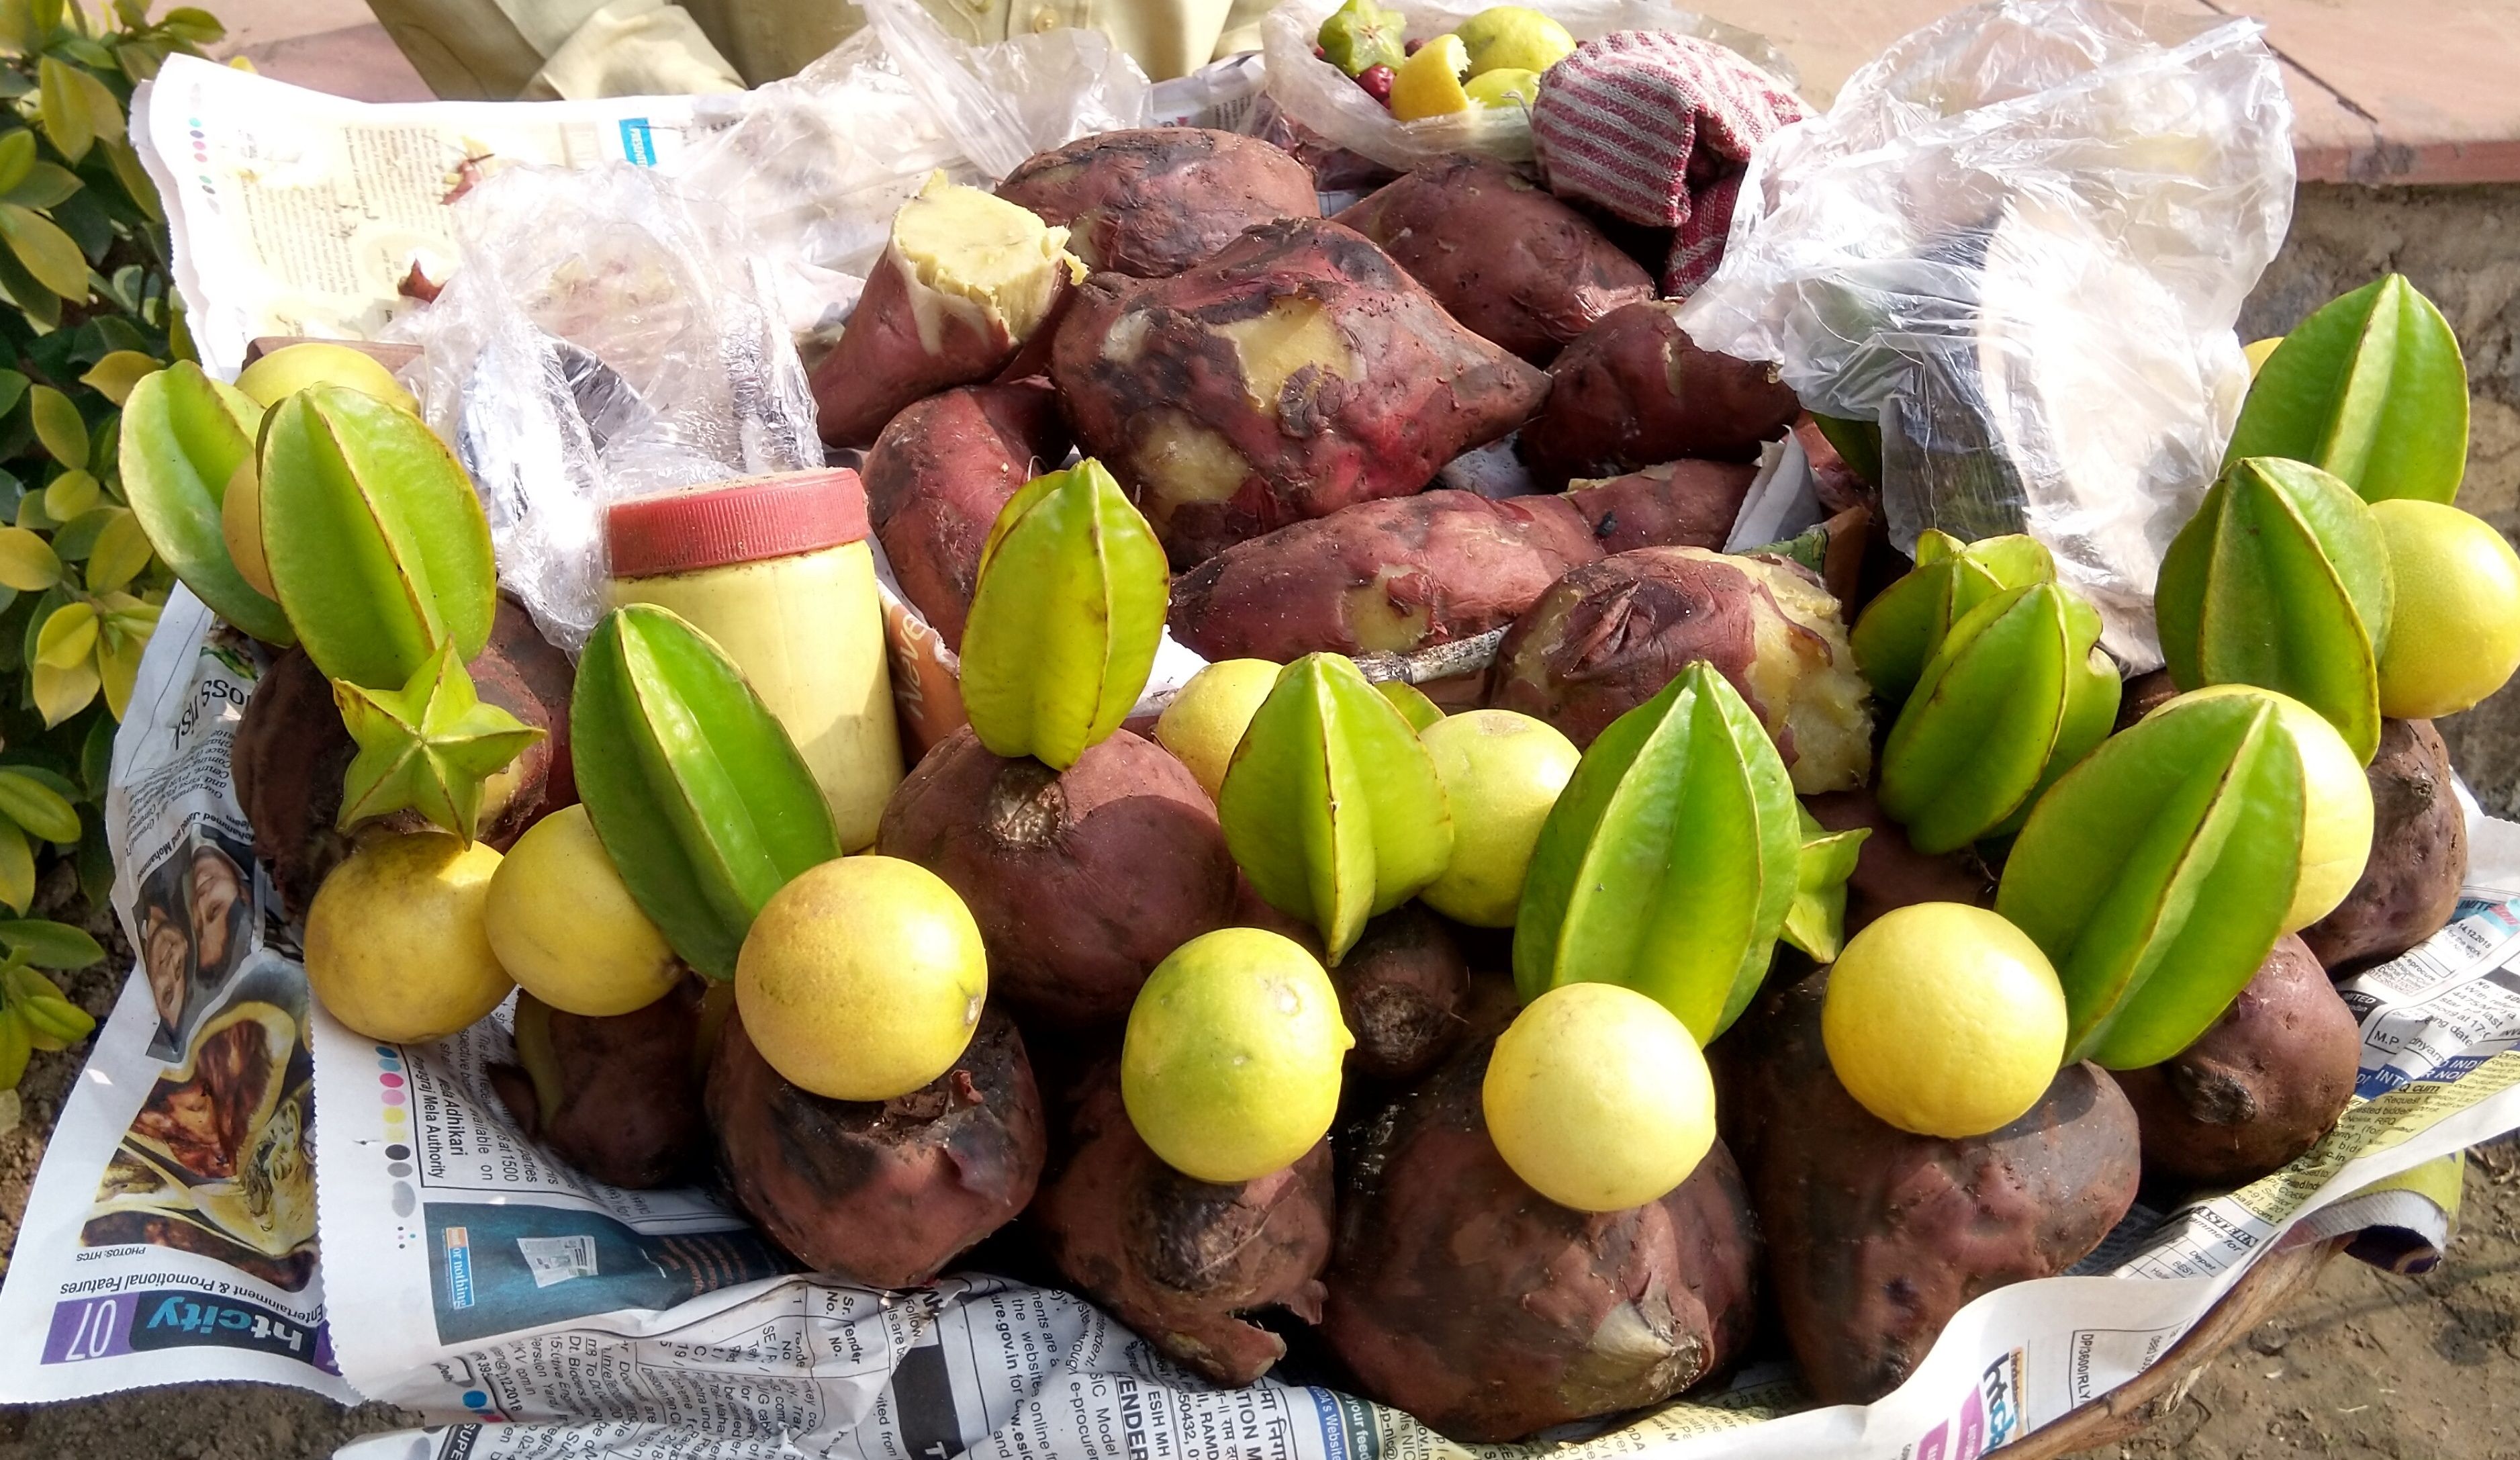 These are sweet potato mix chat with lime & spices. The green one is star fruit or better known as Carambola. The sweet potato are boiled. It is very tasty any time food. Recipe is: Take some boiled sweet potatoes and cut into small pieces, add some lime juice with Salt and other spices you can add some star fruit juice also.